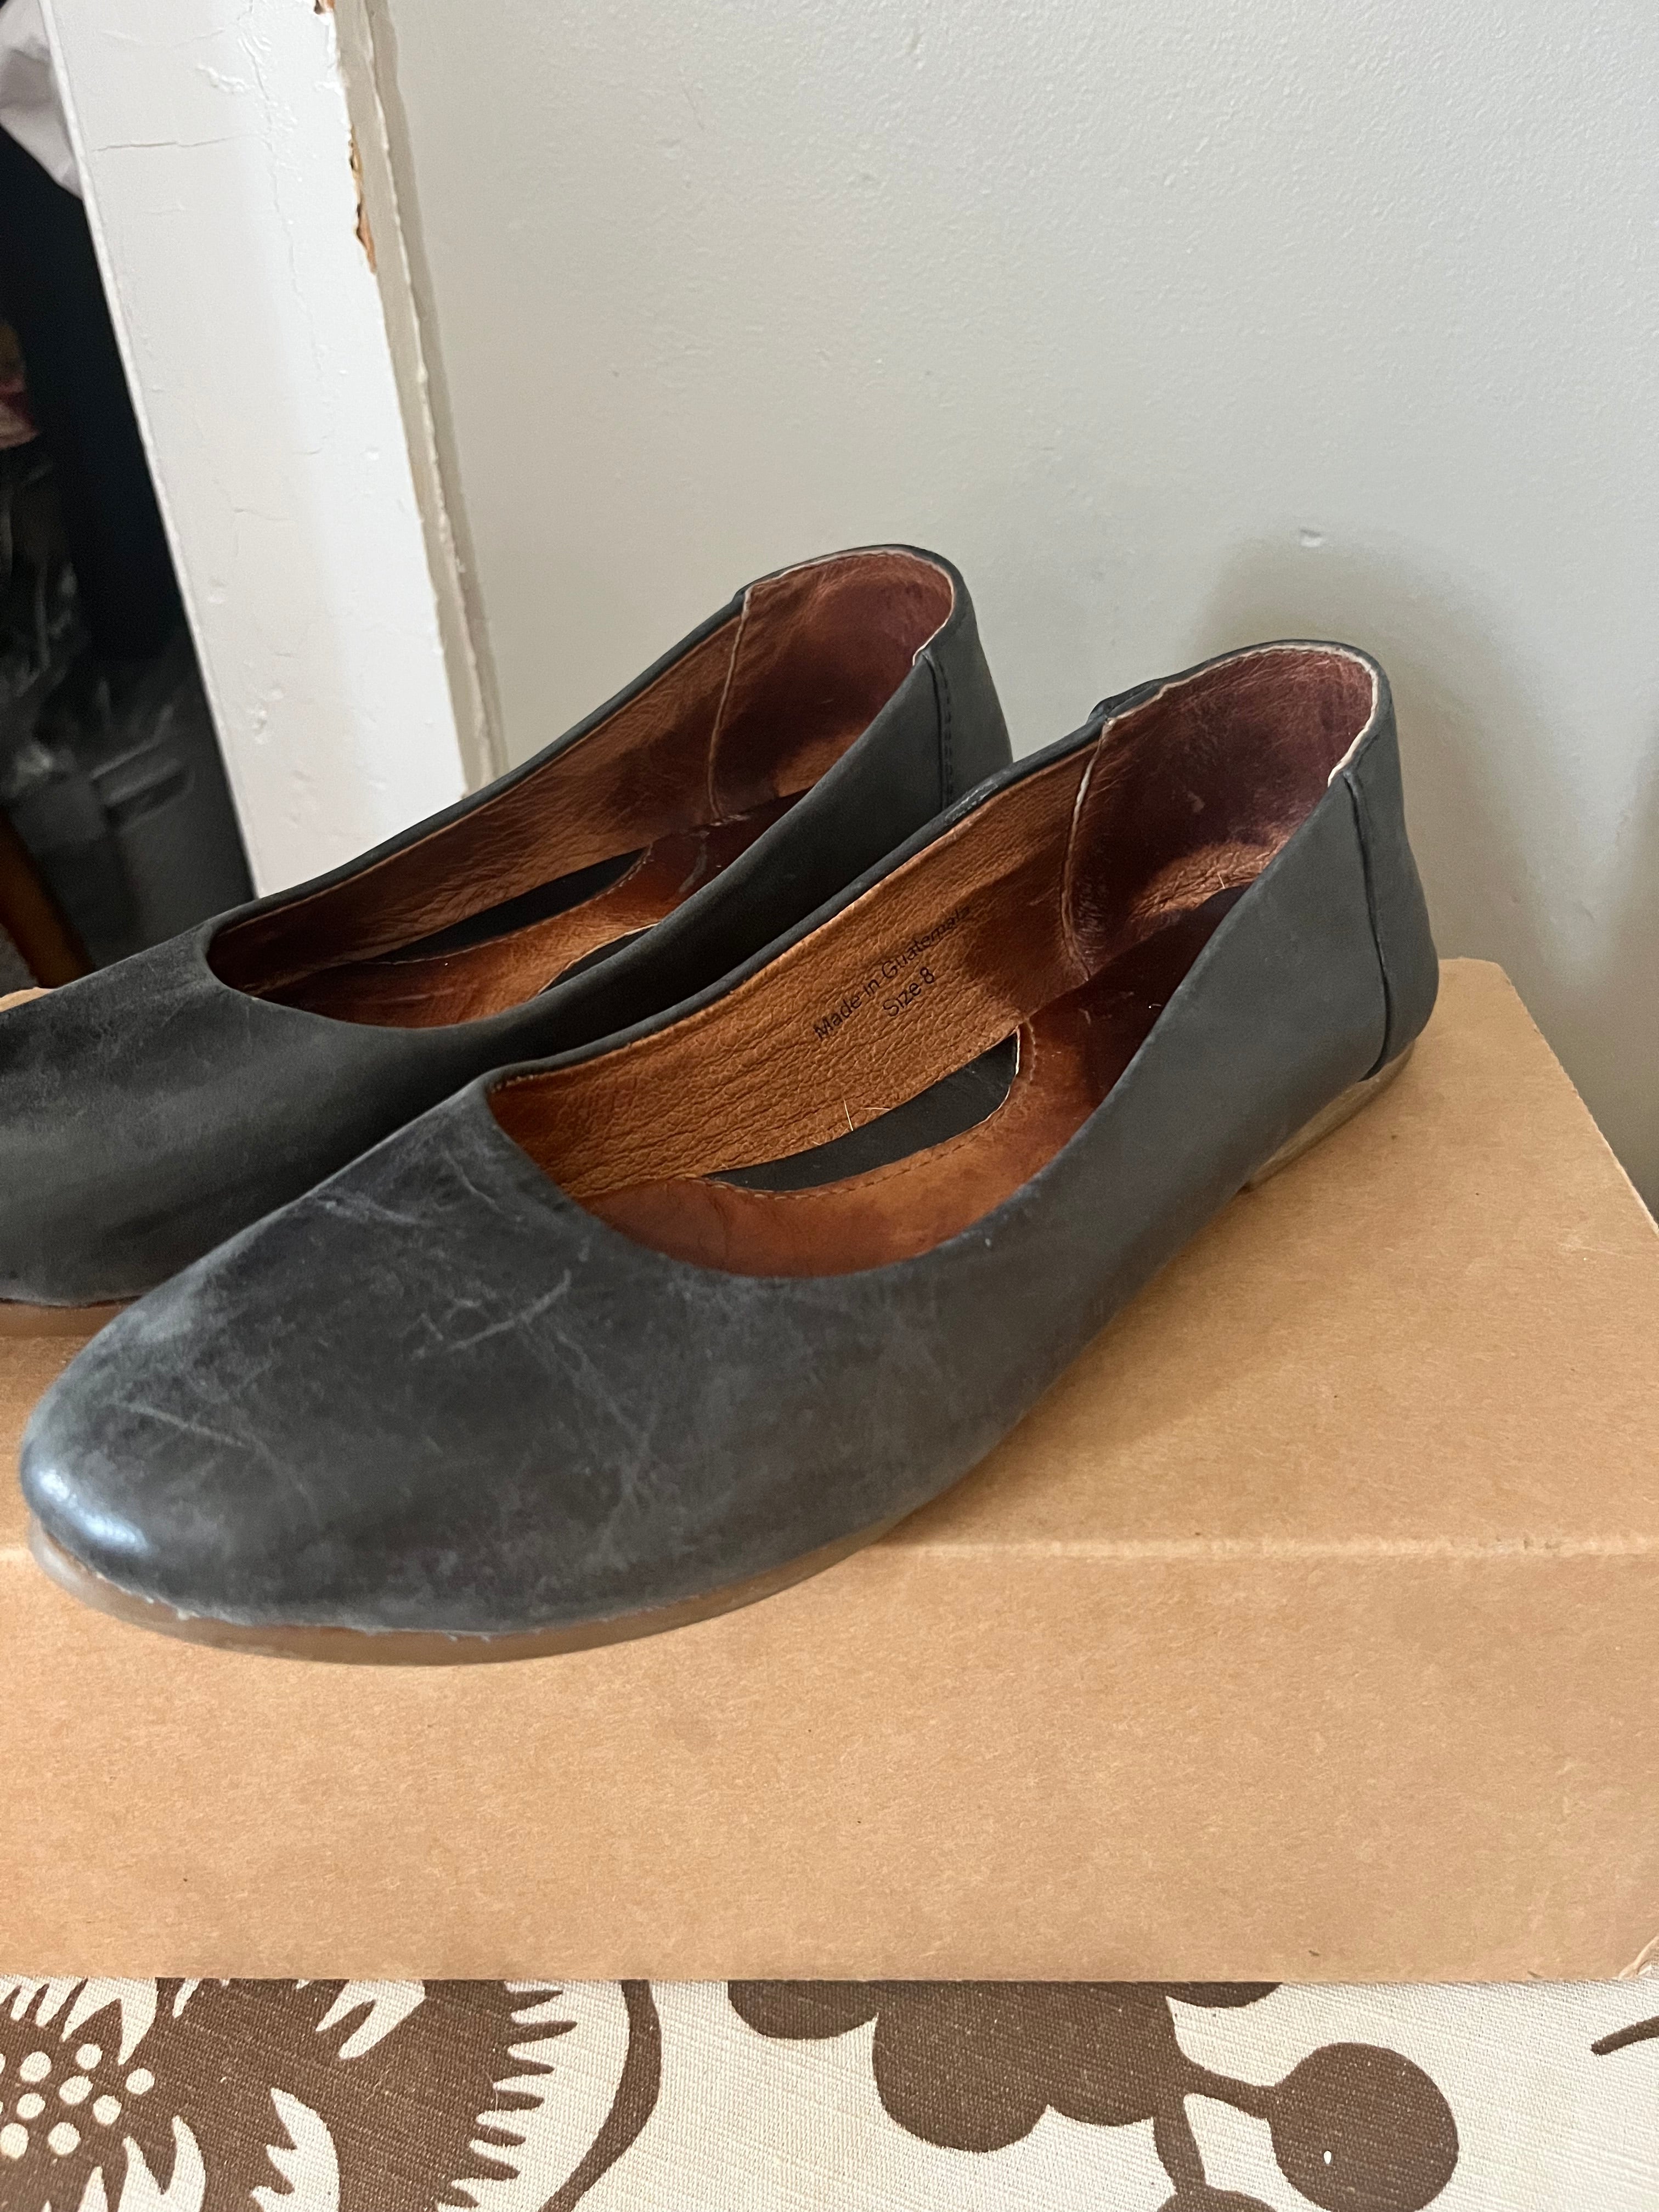 Gaby in Solid Charcoal size 8 - Pre-loved